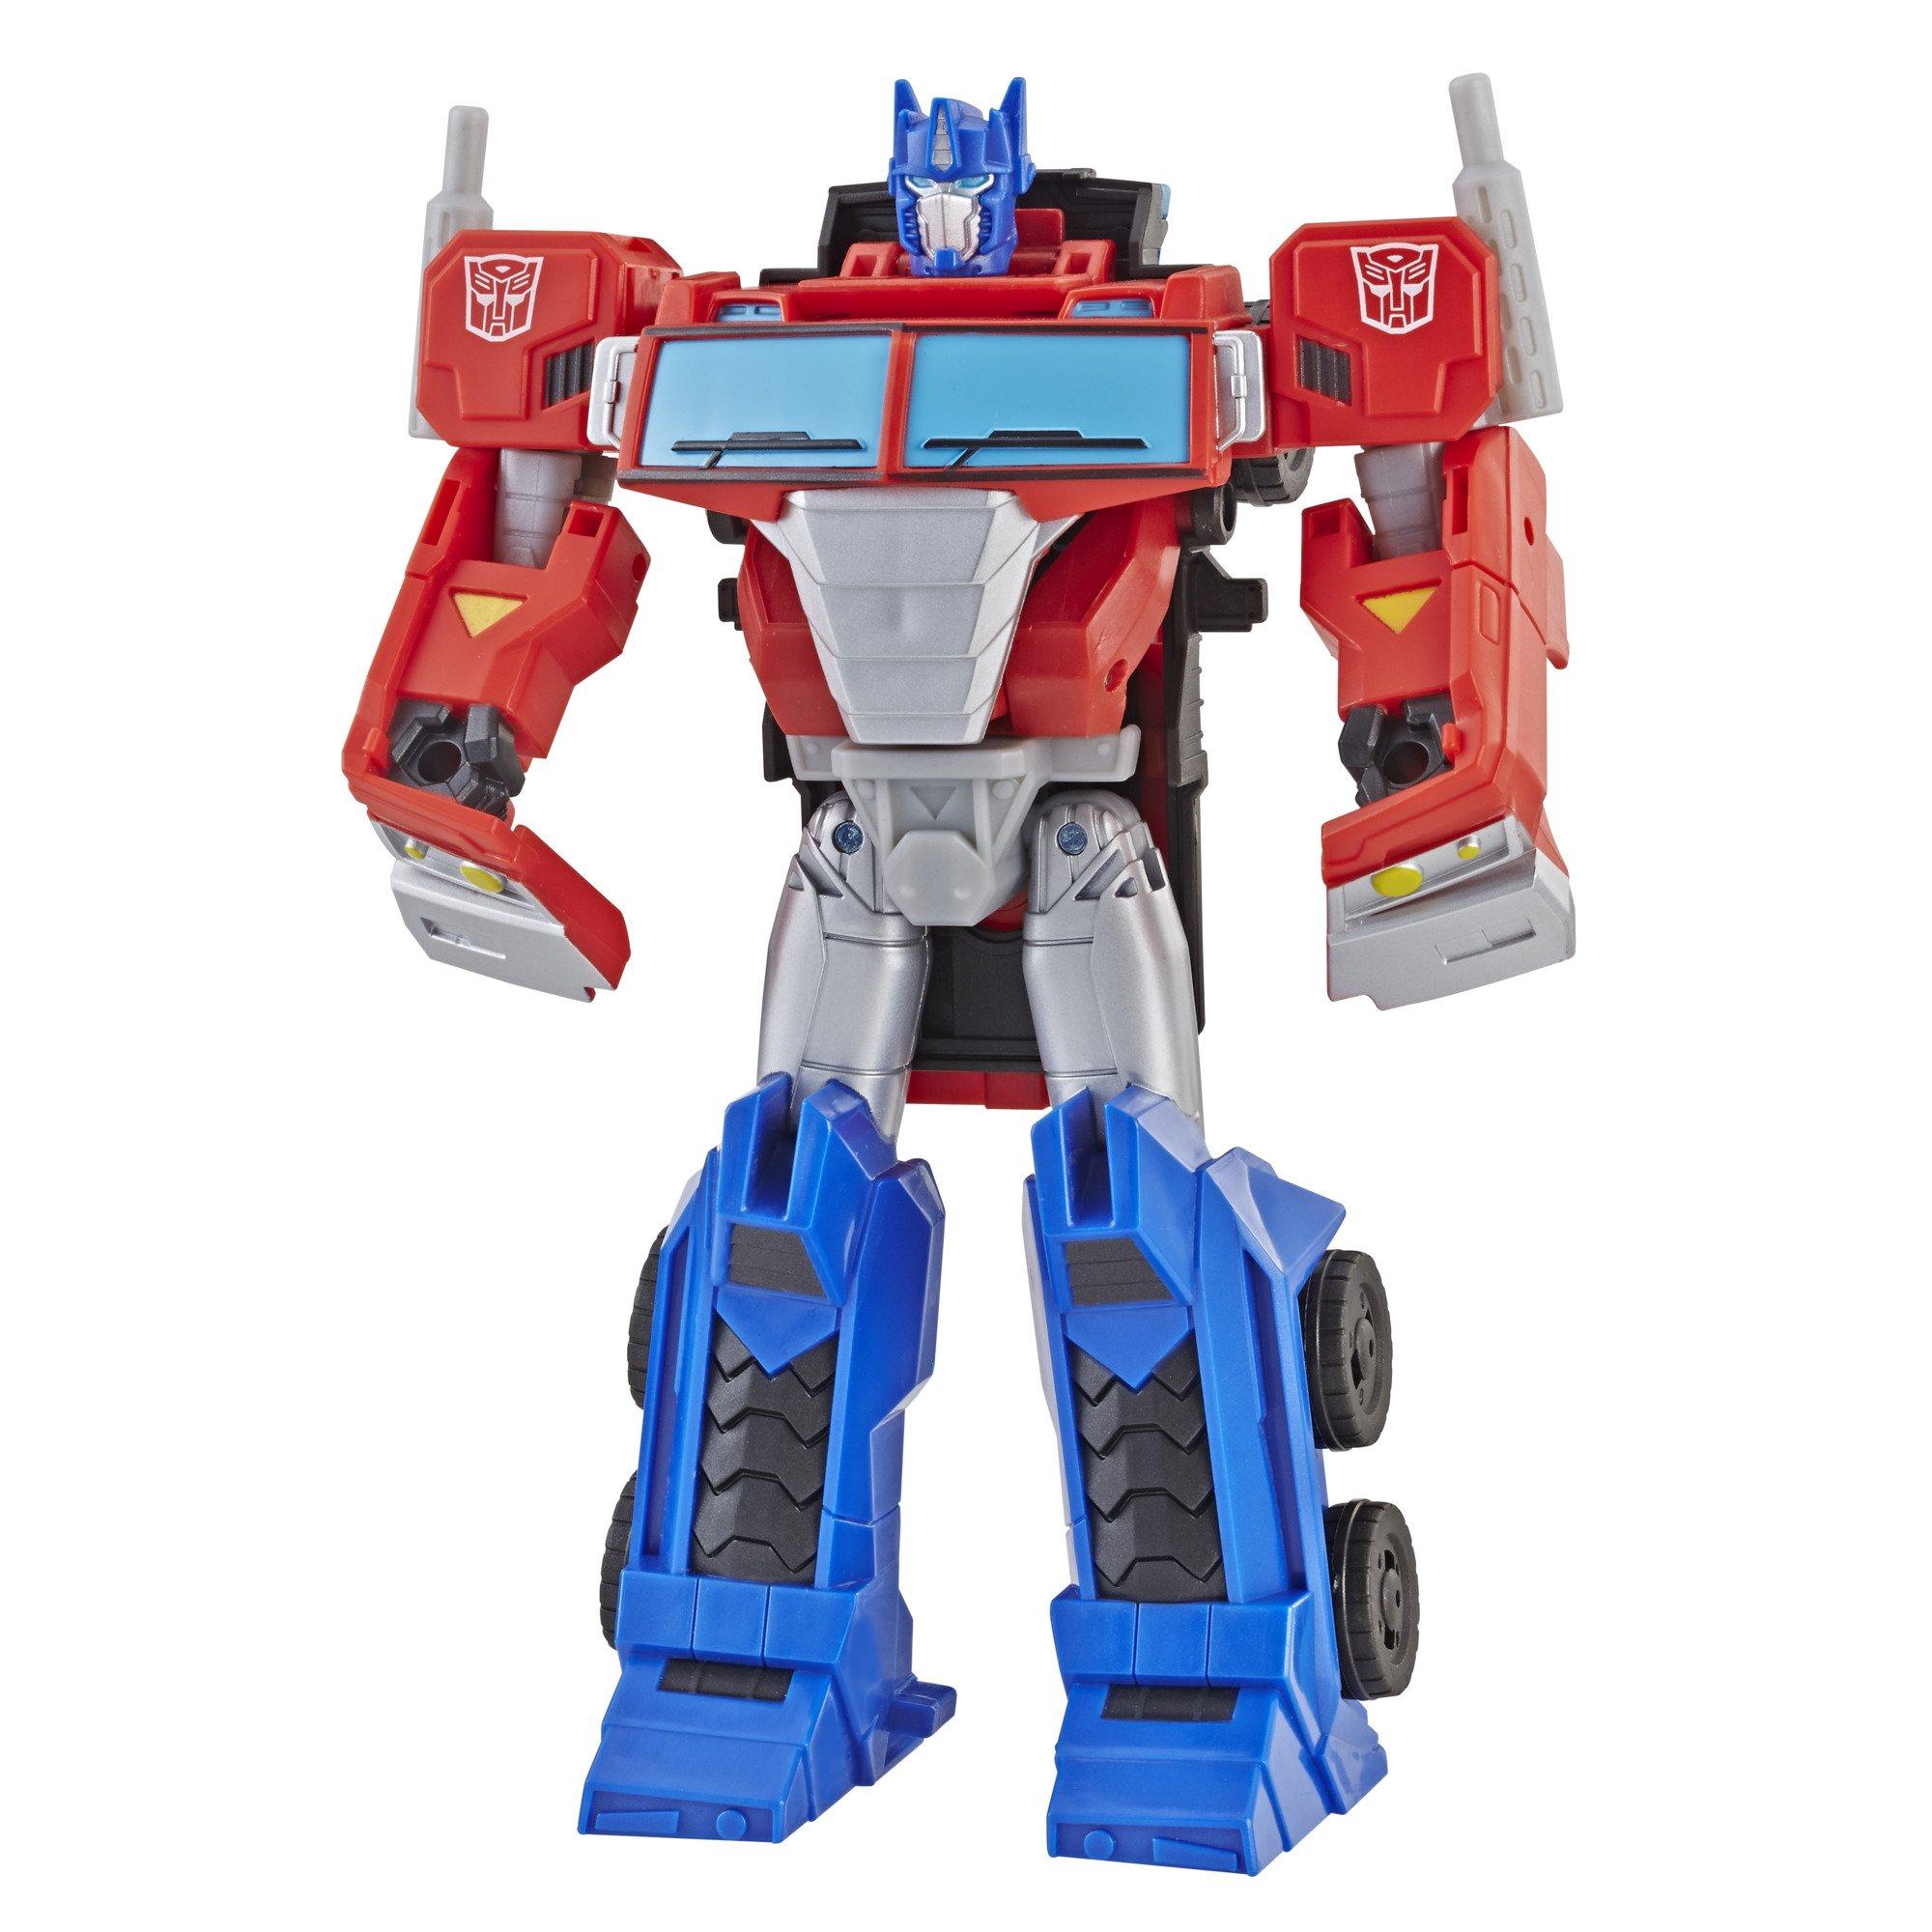 Transformers Commander Optimus Prime Cyberverse Action Figure Toy New in box